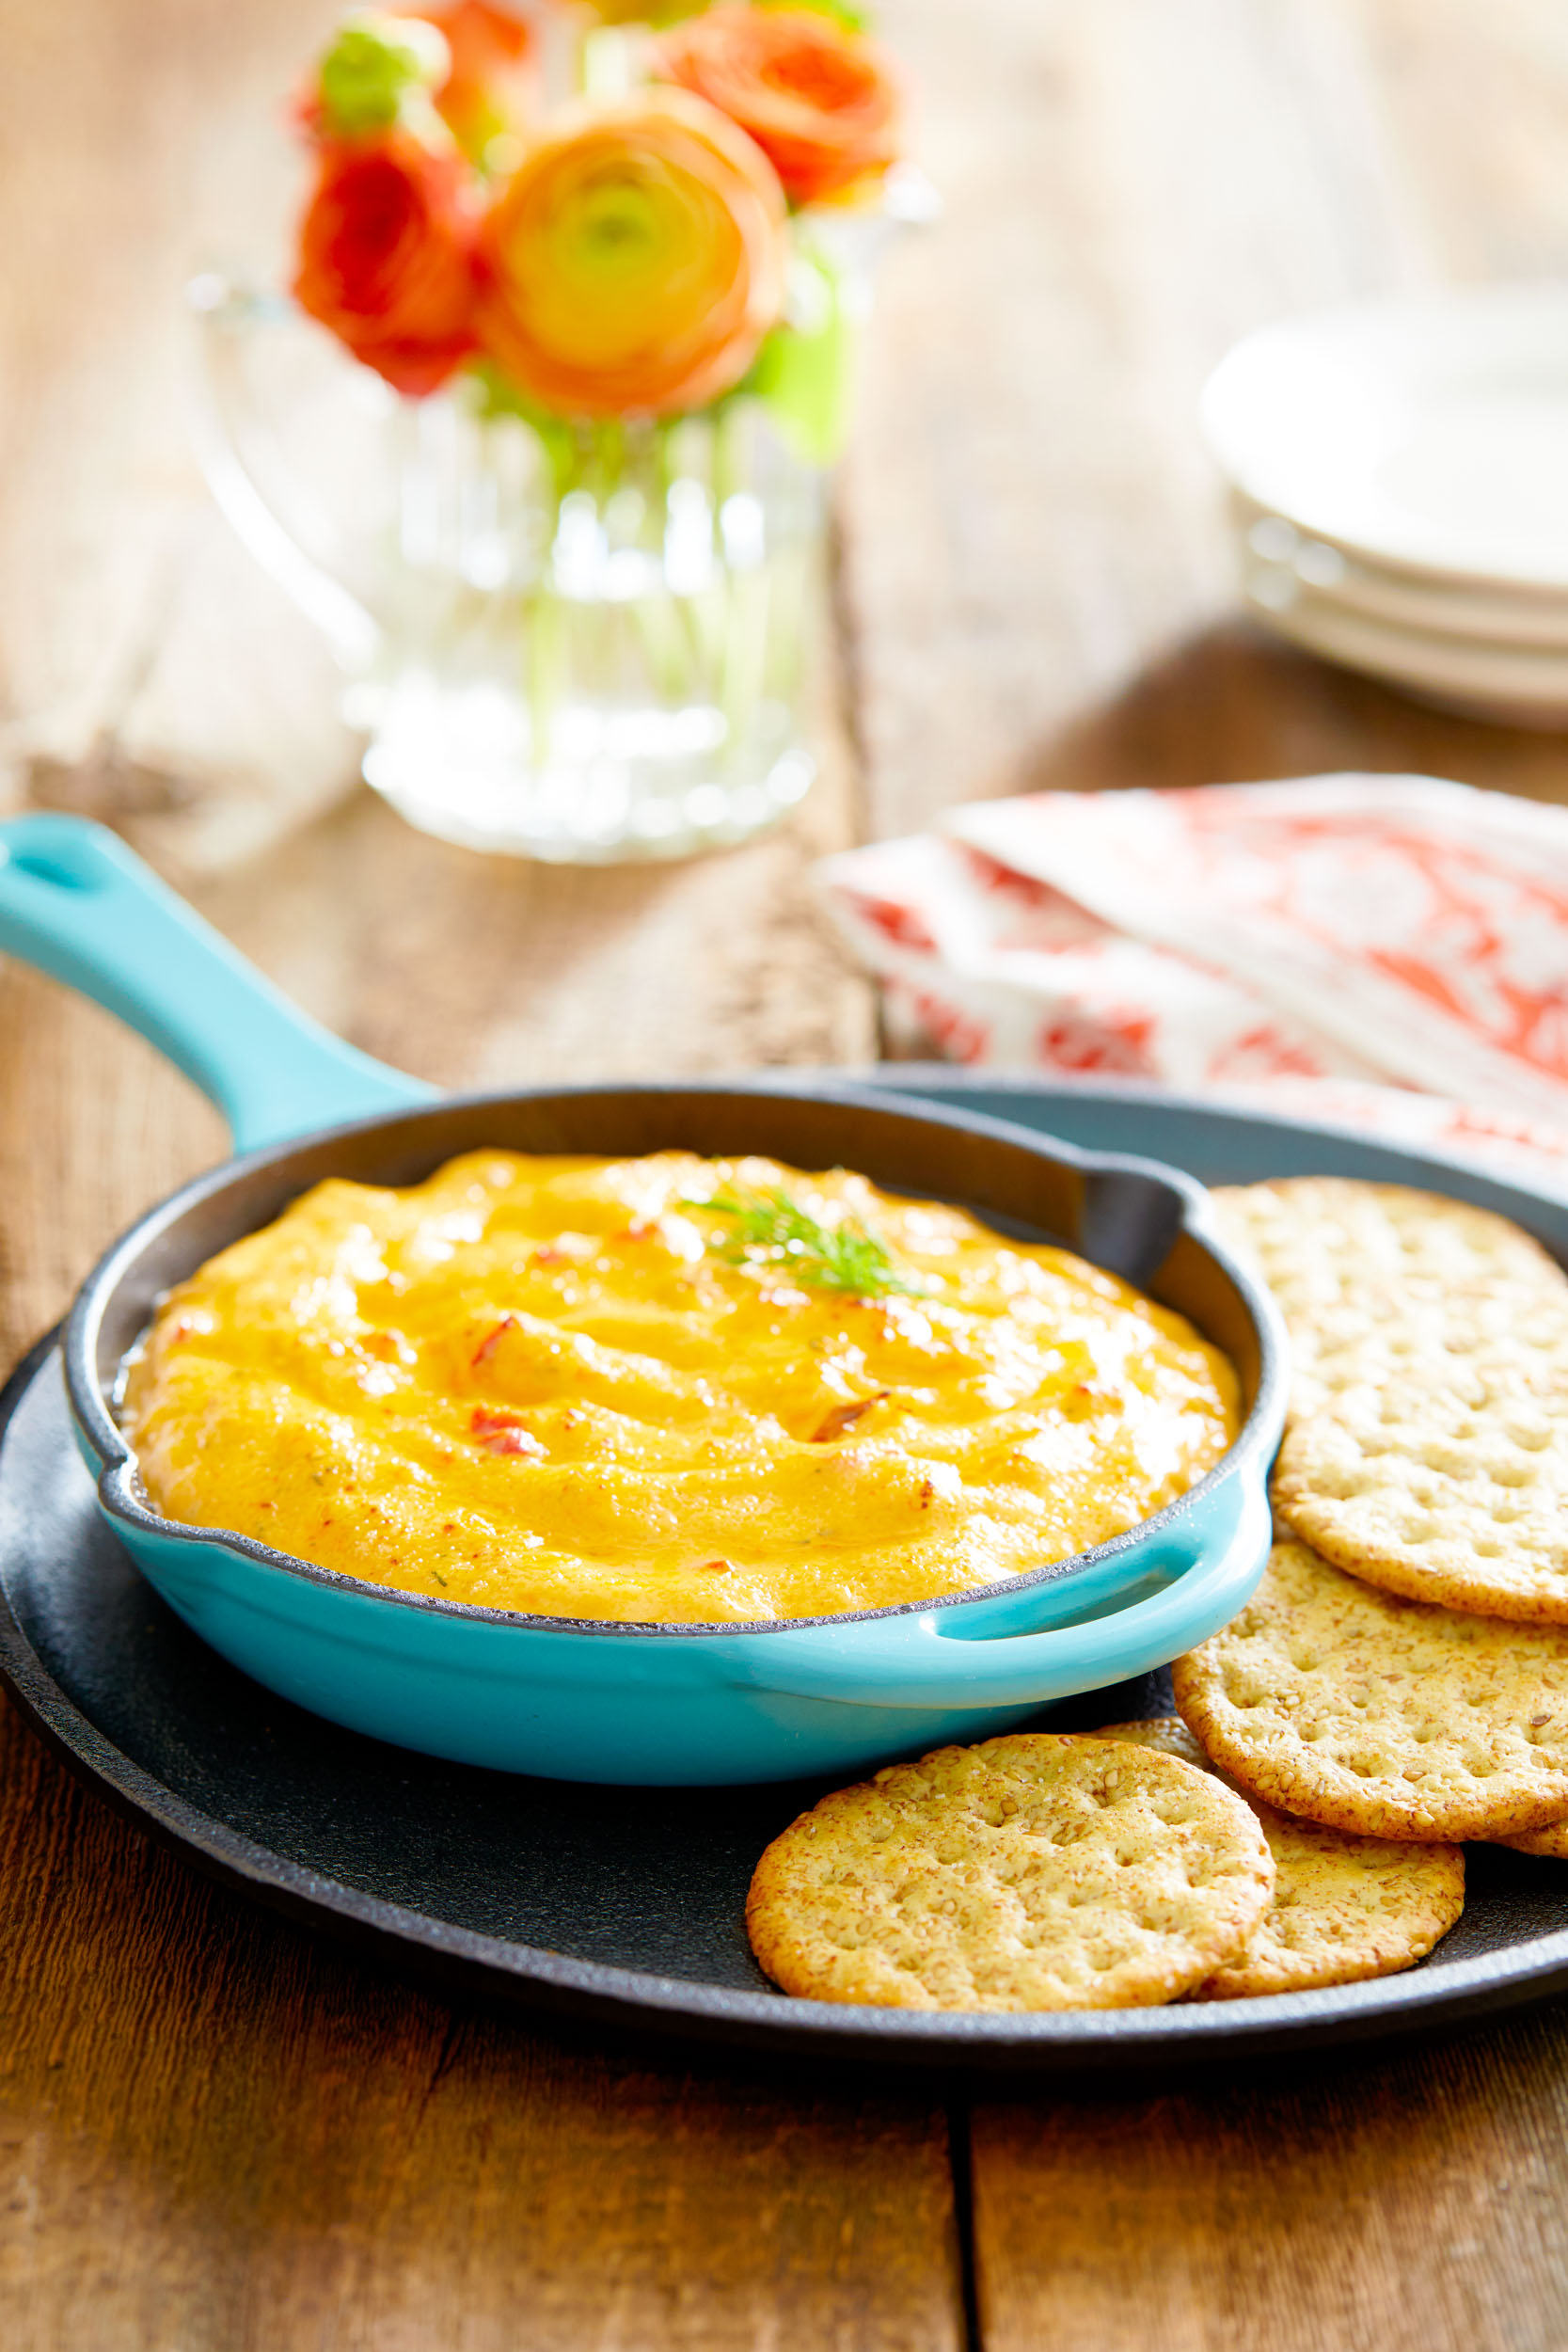 dominic-perri-projects-pioneer-woman-pimento-cheese-dip